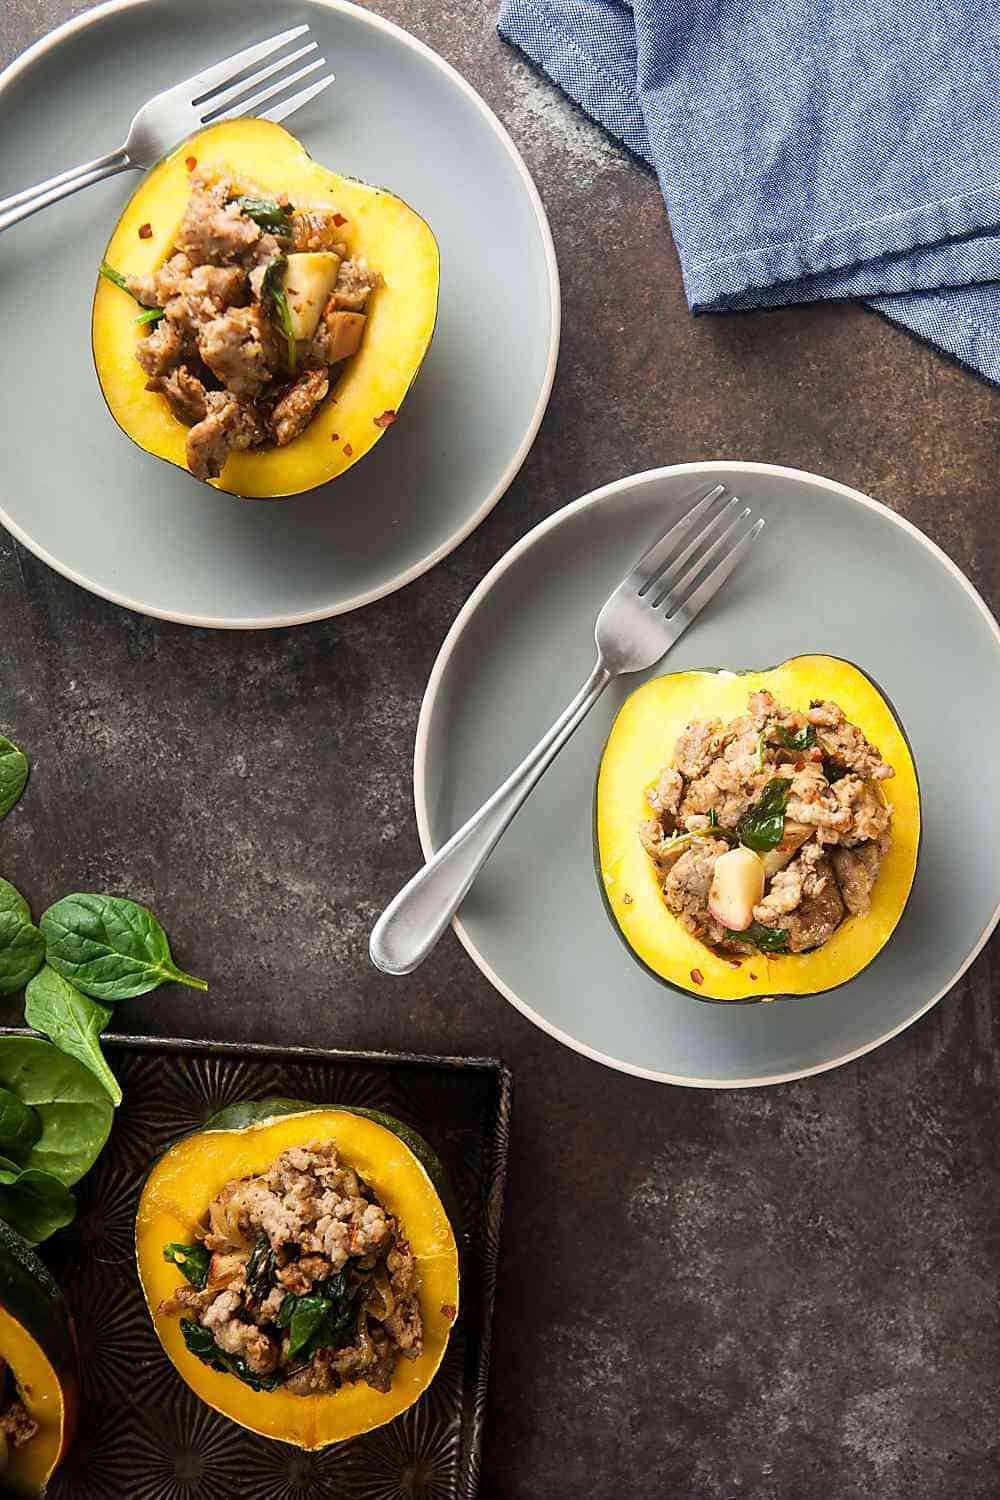 sausage stuffed spaghetti squash plated and ready to eat